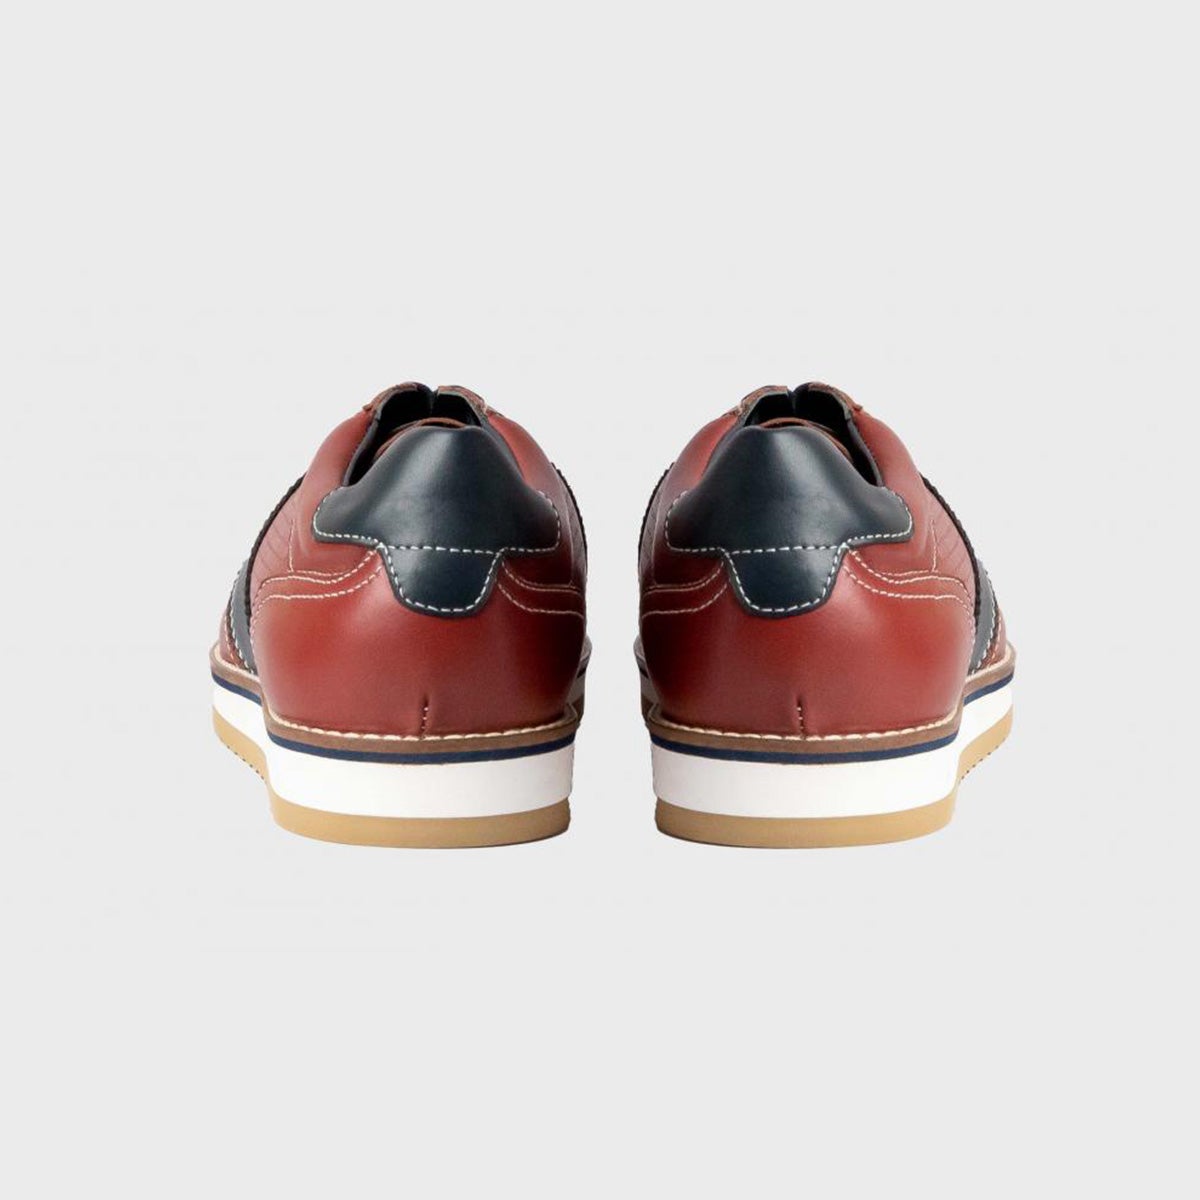 Men Leather Casual sneakers ǀ JAMES 6783